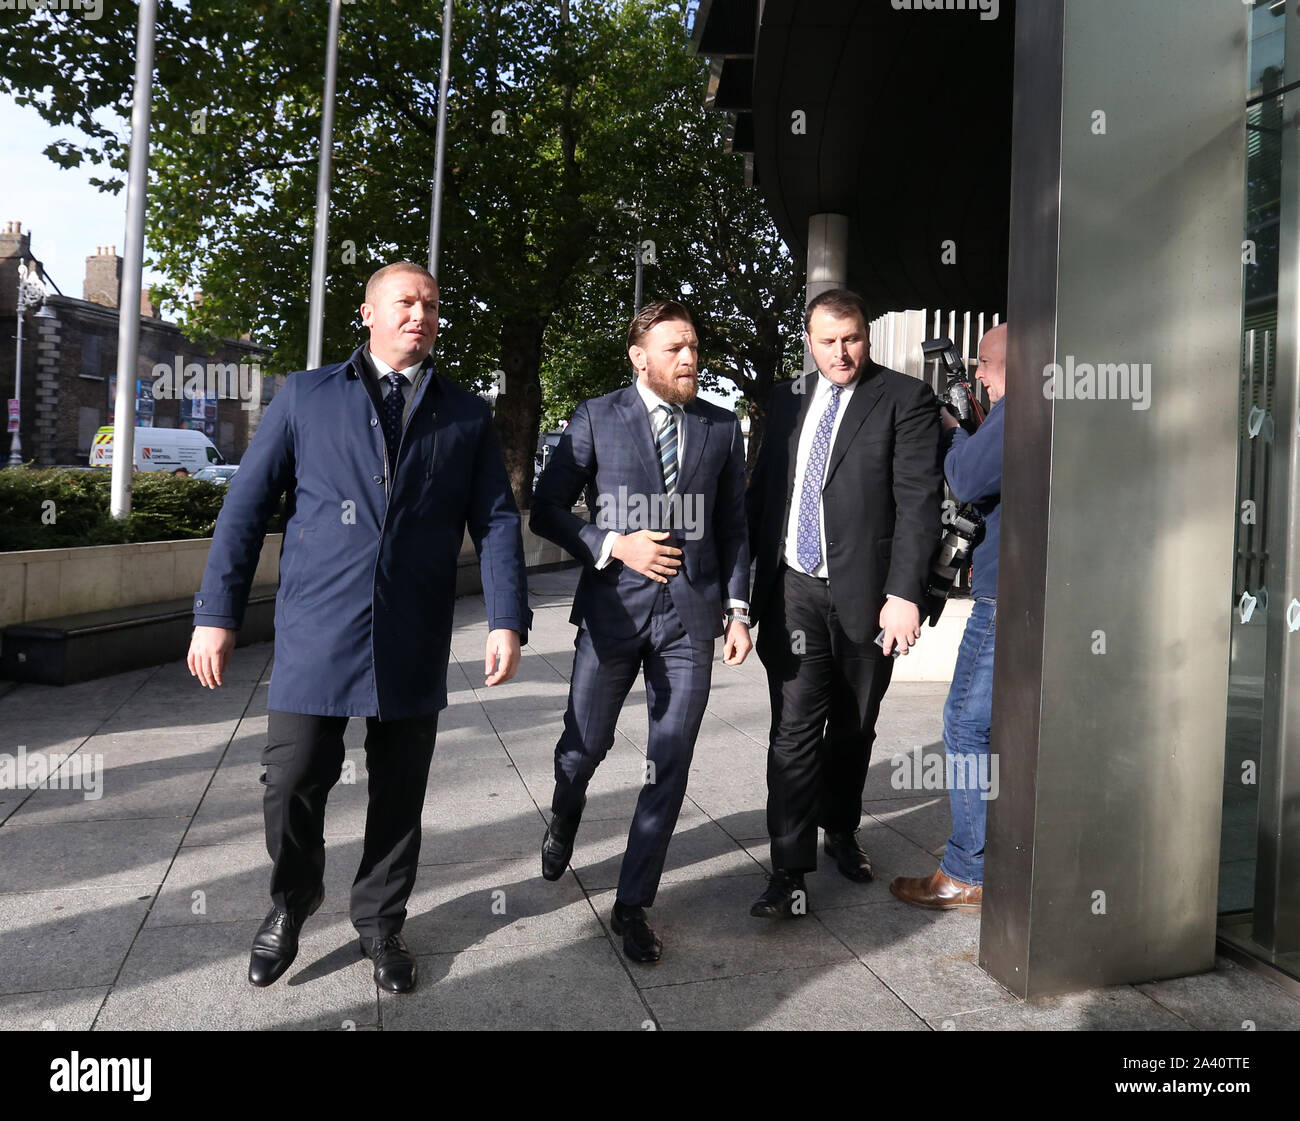 Dublin, Ireland. 11th Oct, 2019. Conor McGregor. Pictured UFC Fighhter  Conor McGregor arriving at the Central Criminal Courts of Justice in Dublin this morning in connection with an alleged assault in Dublin earlier this year. The MMA star faces a single assault charge following an incident at the Marble Arch pub in Drimnagh on April 6th. Credit: RollingNews.ie/Alamy Live News Stock Photo